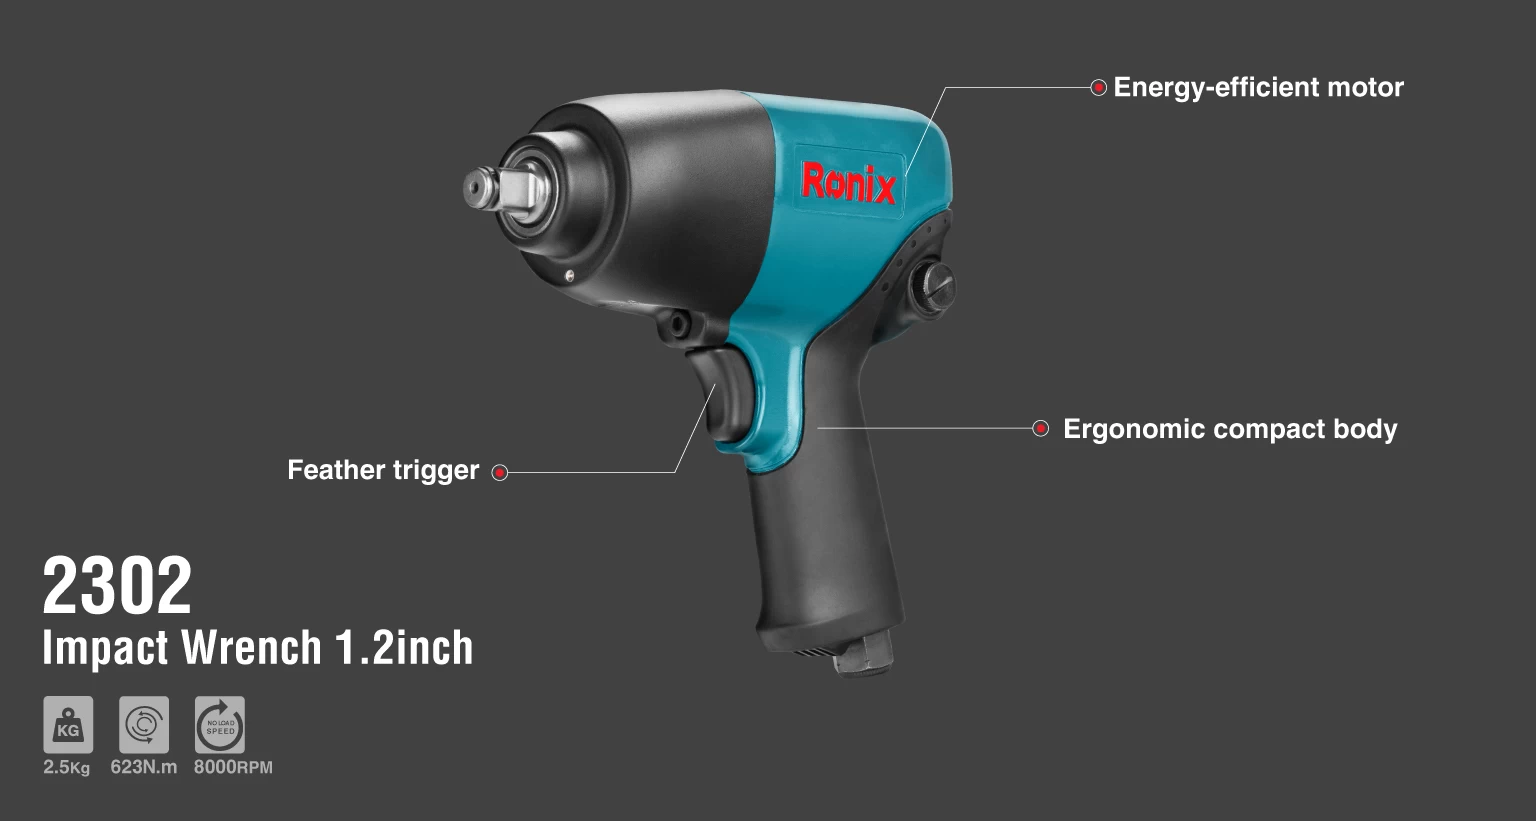 Twin Hammer Air Impact Wrench-1/2 Inch	_details